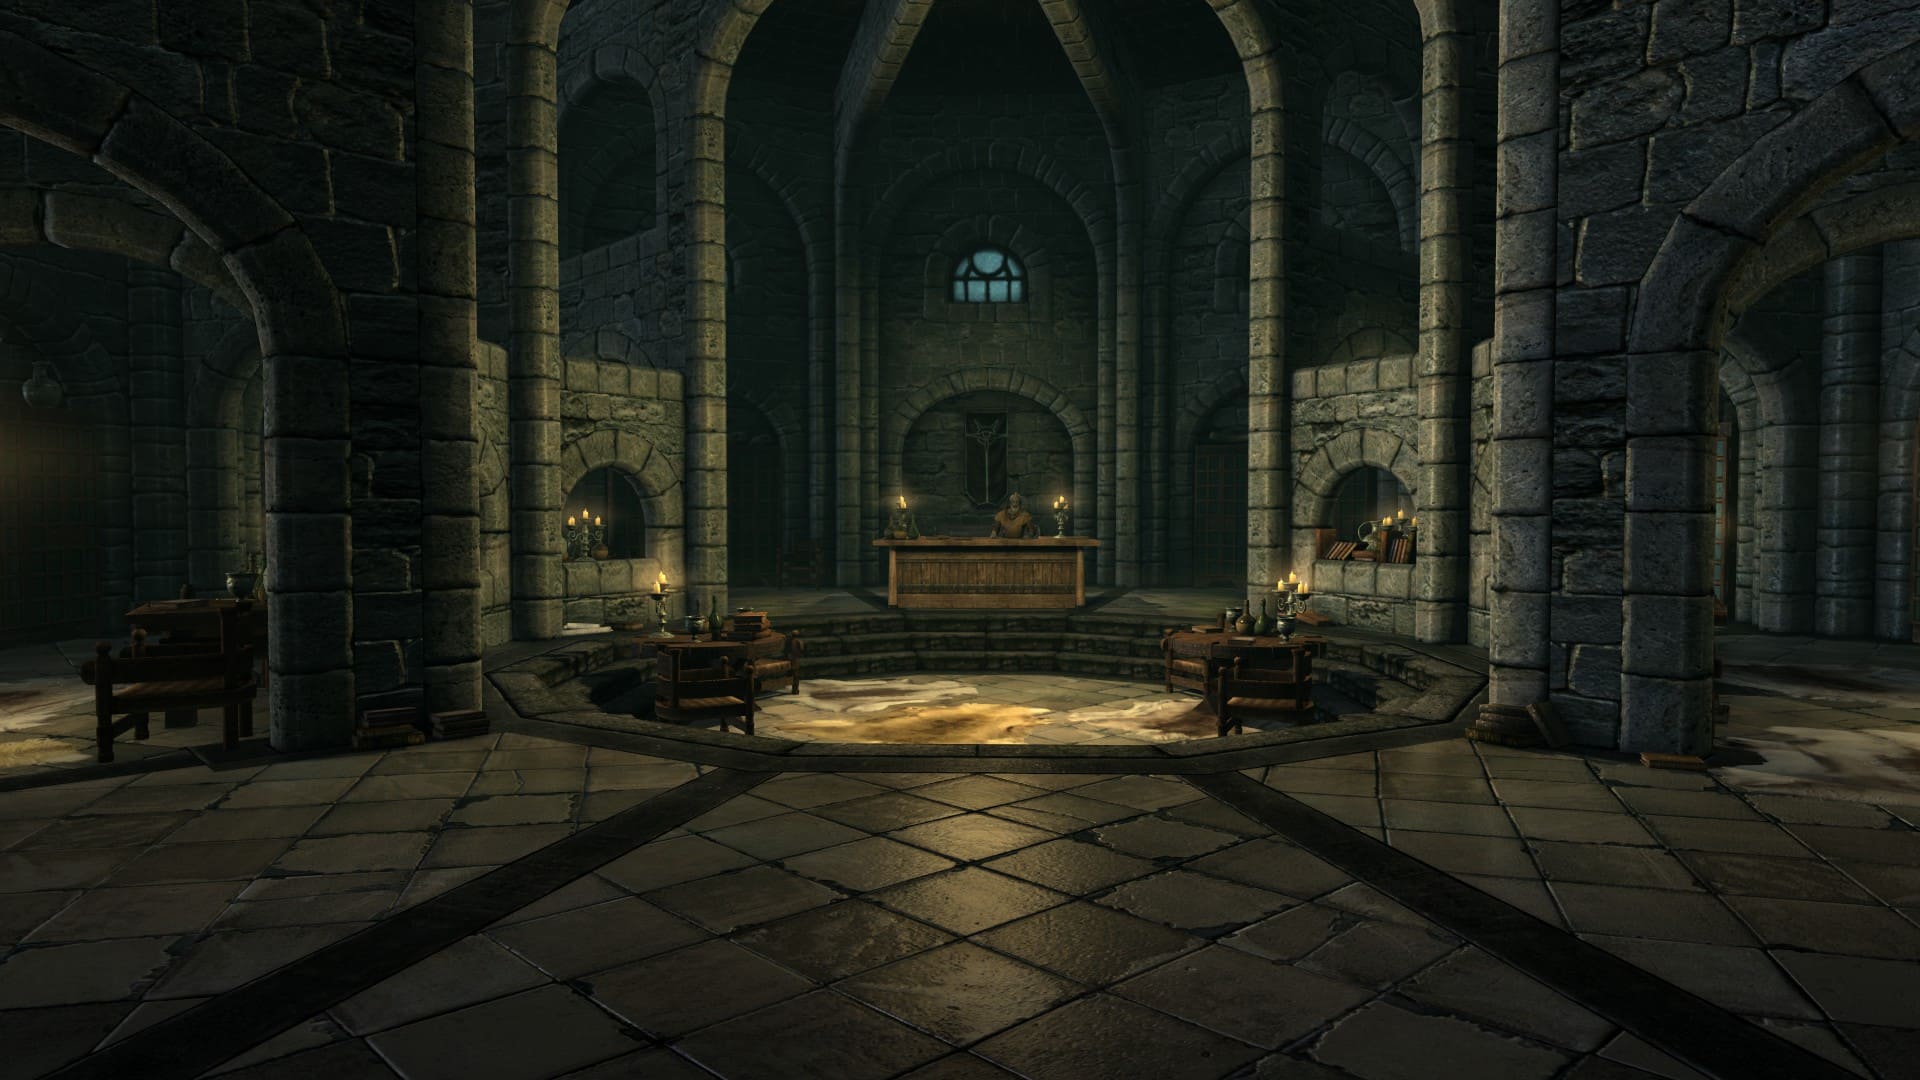 Image of the best library in Skyrim